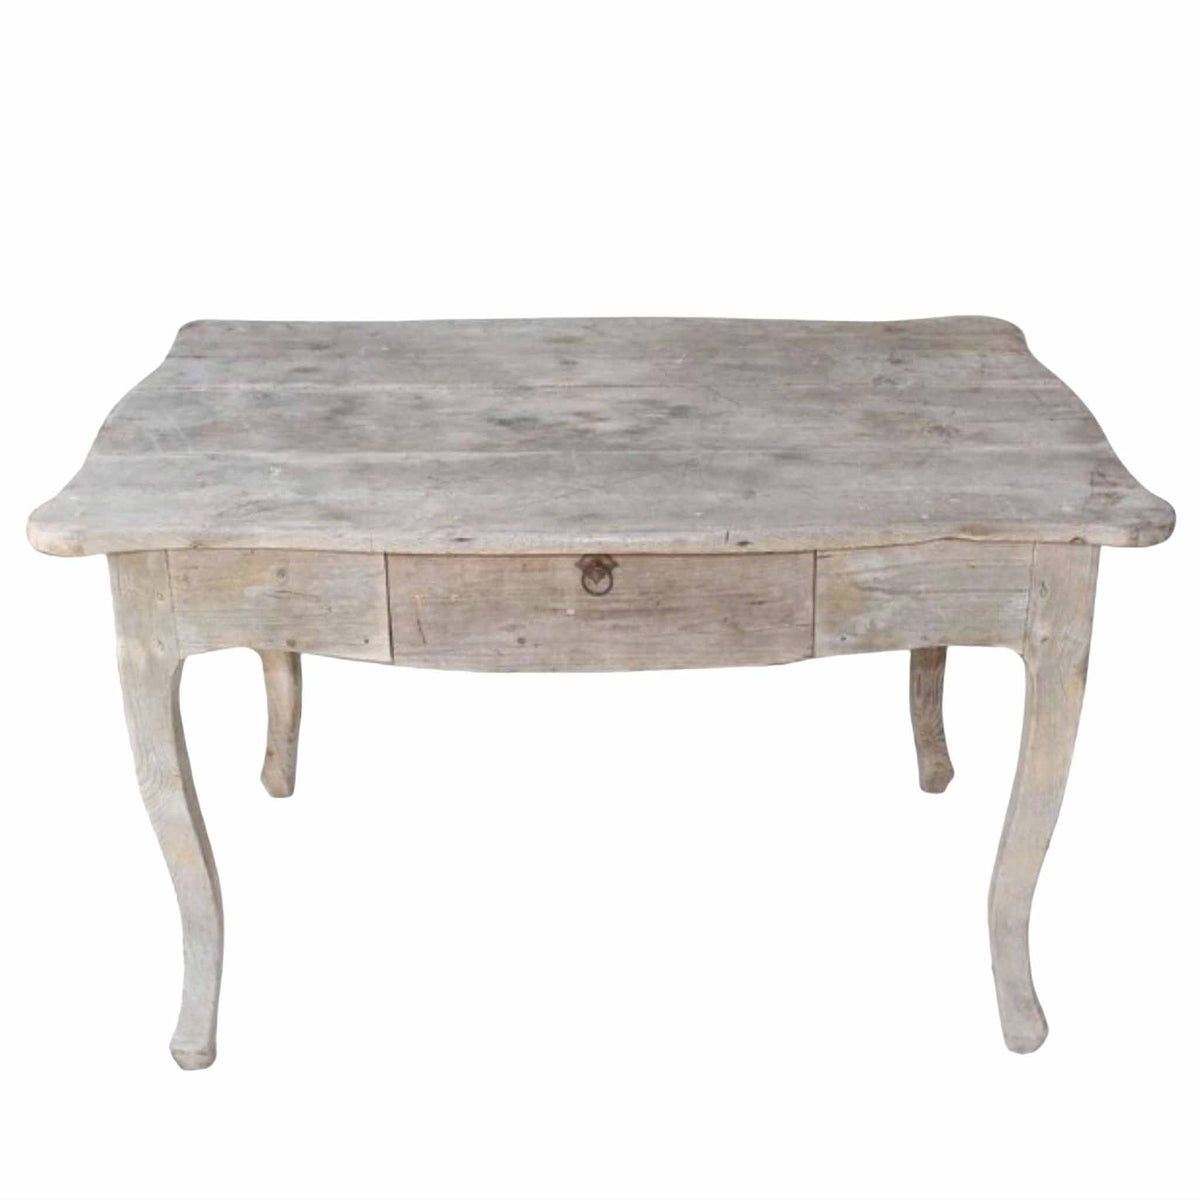 ANTIQUE FRENCH TABLE